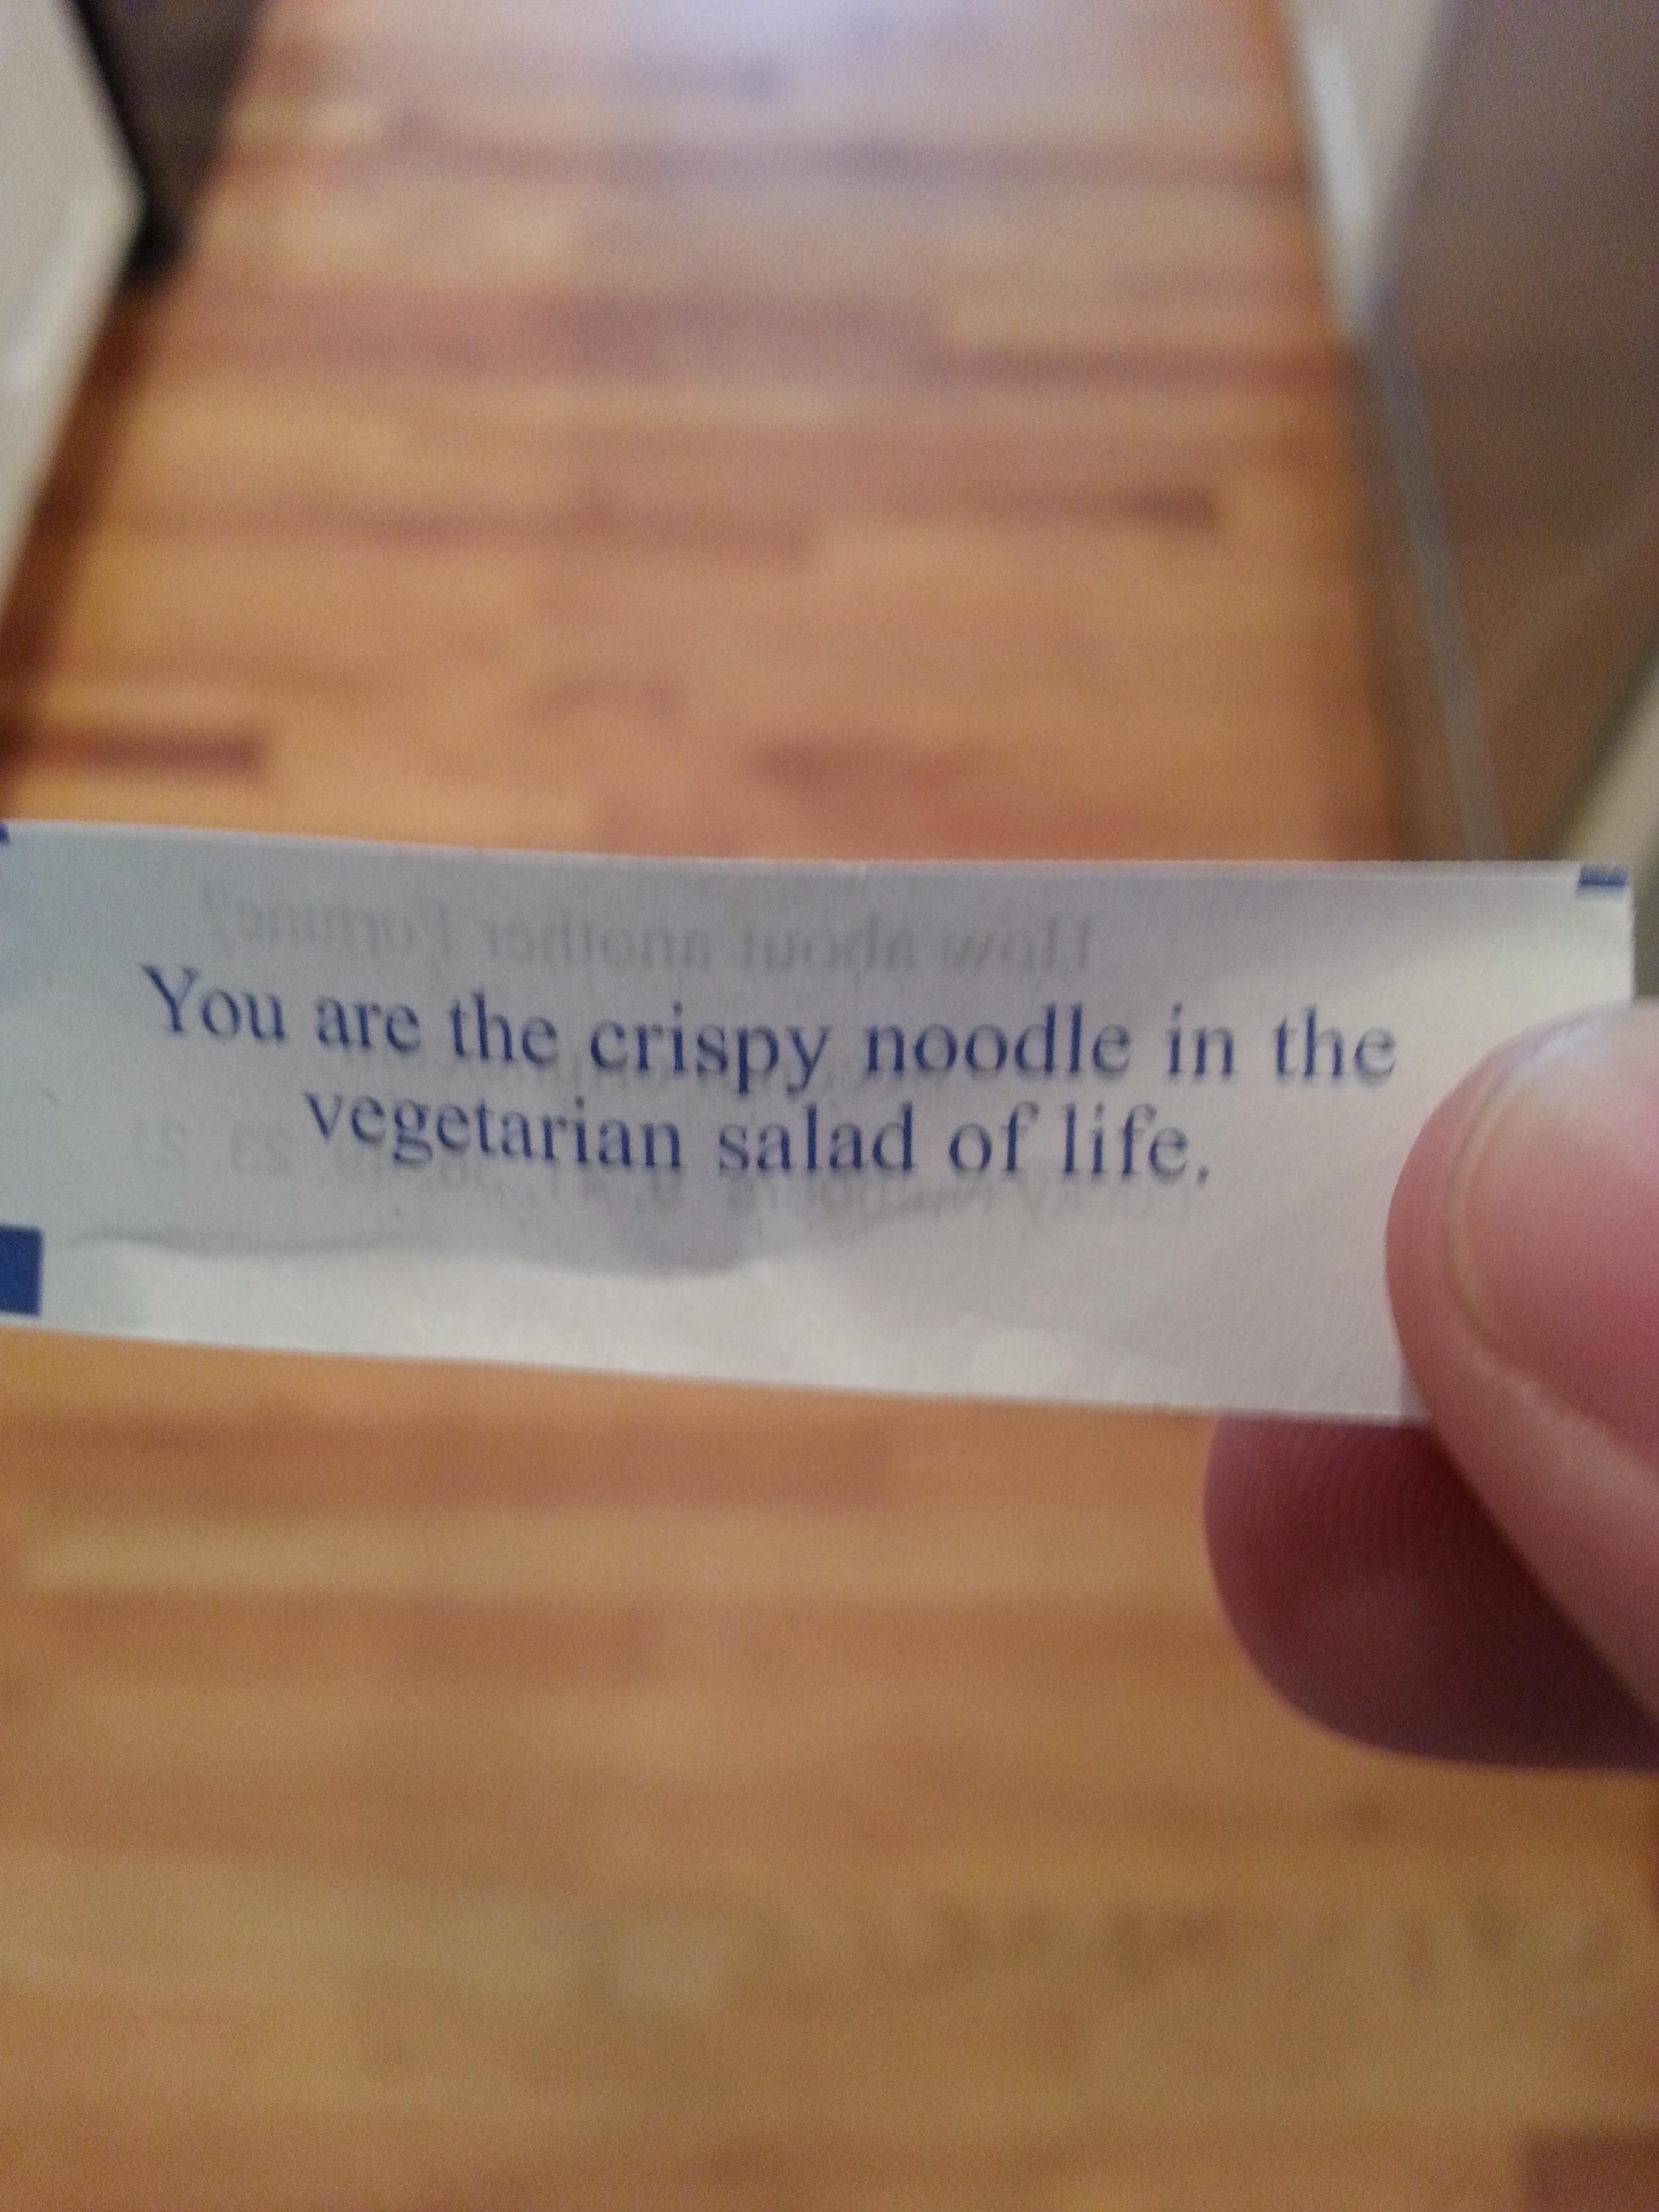 Probably the strangest fortune cookie I've ever seen